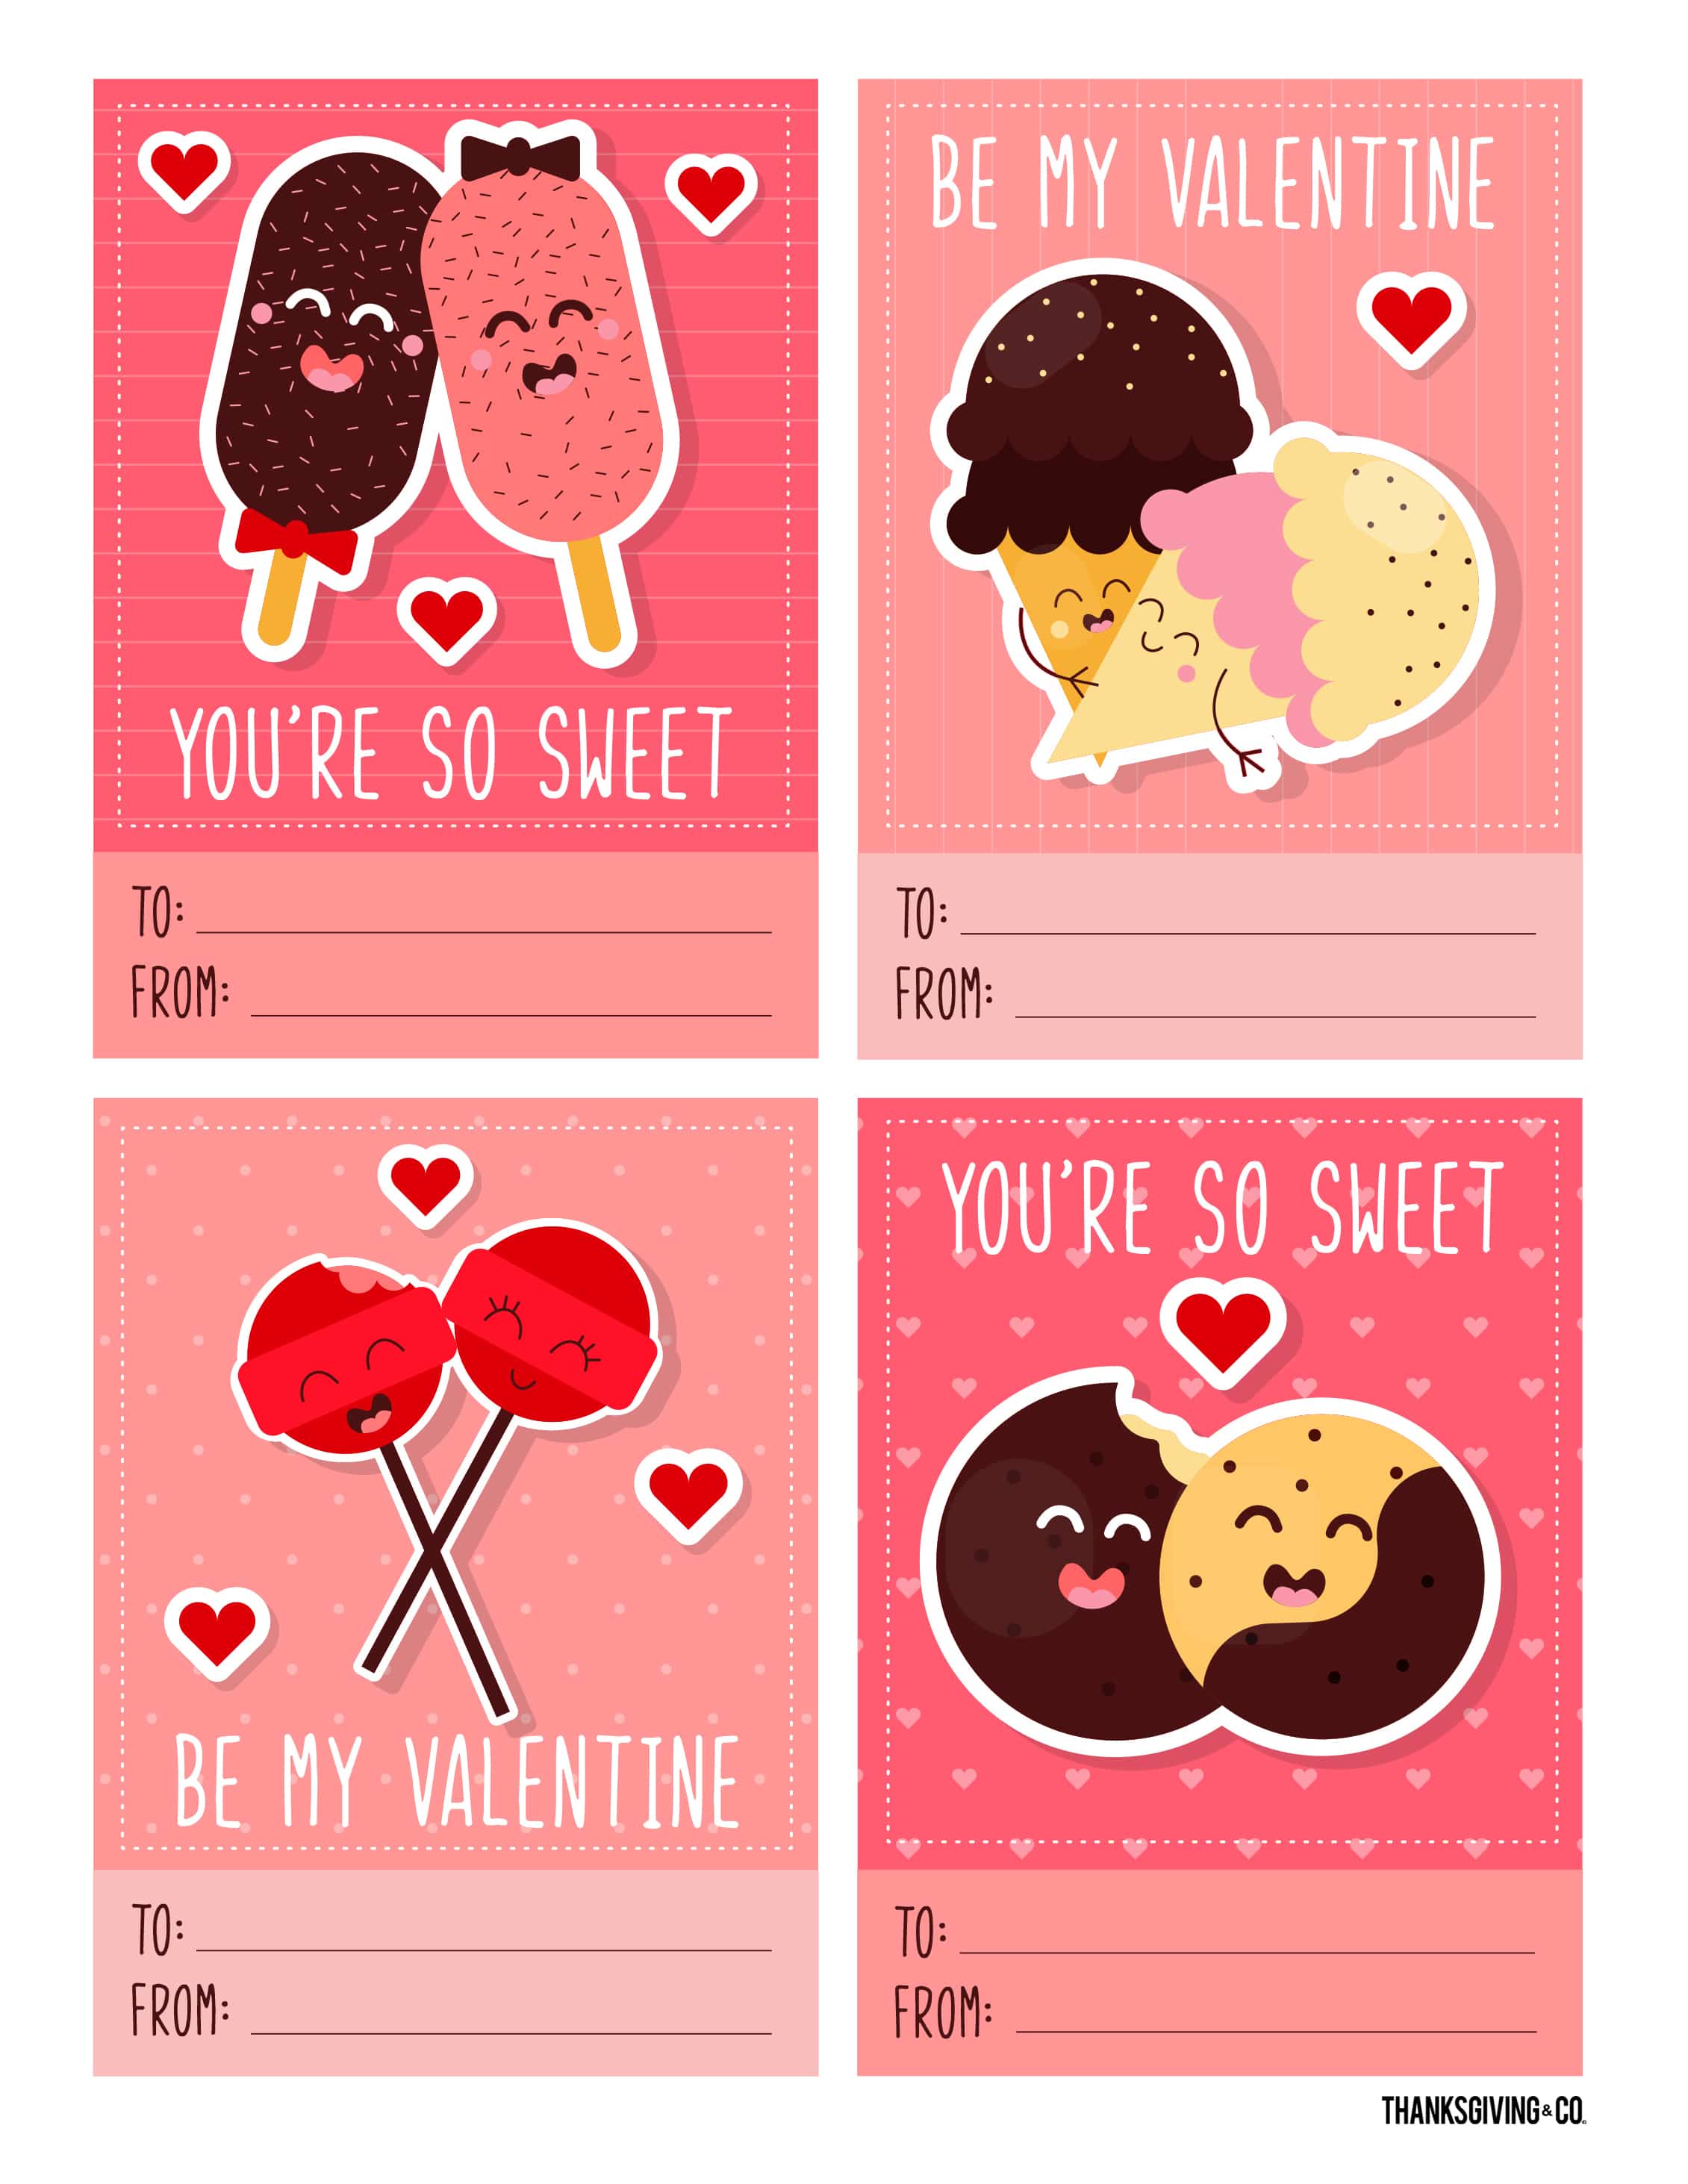 3 Free Printable Valentine s Day Cards Perfect For Kids To Share At School